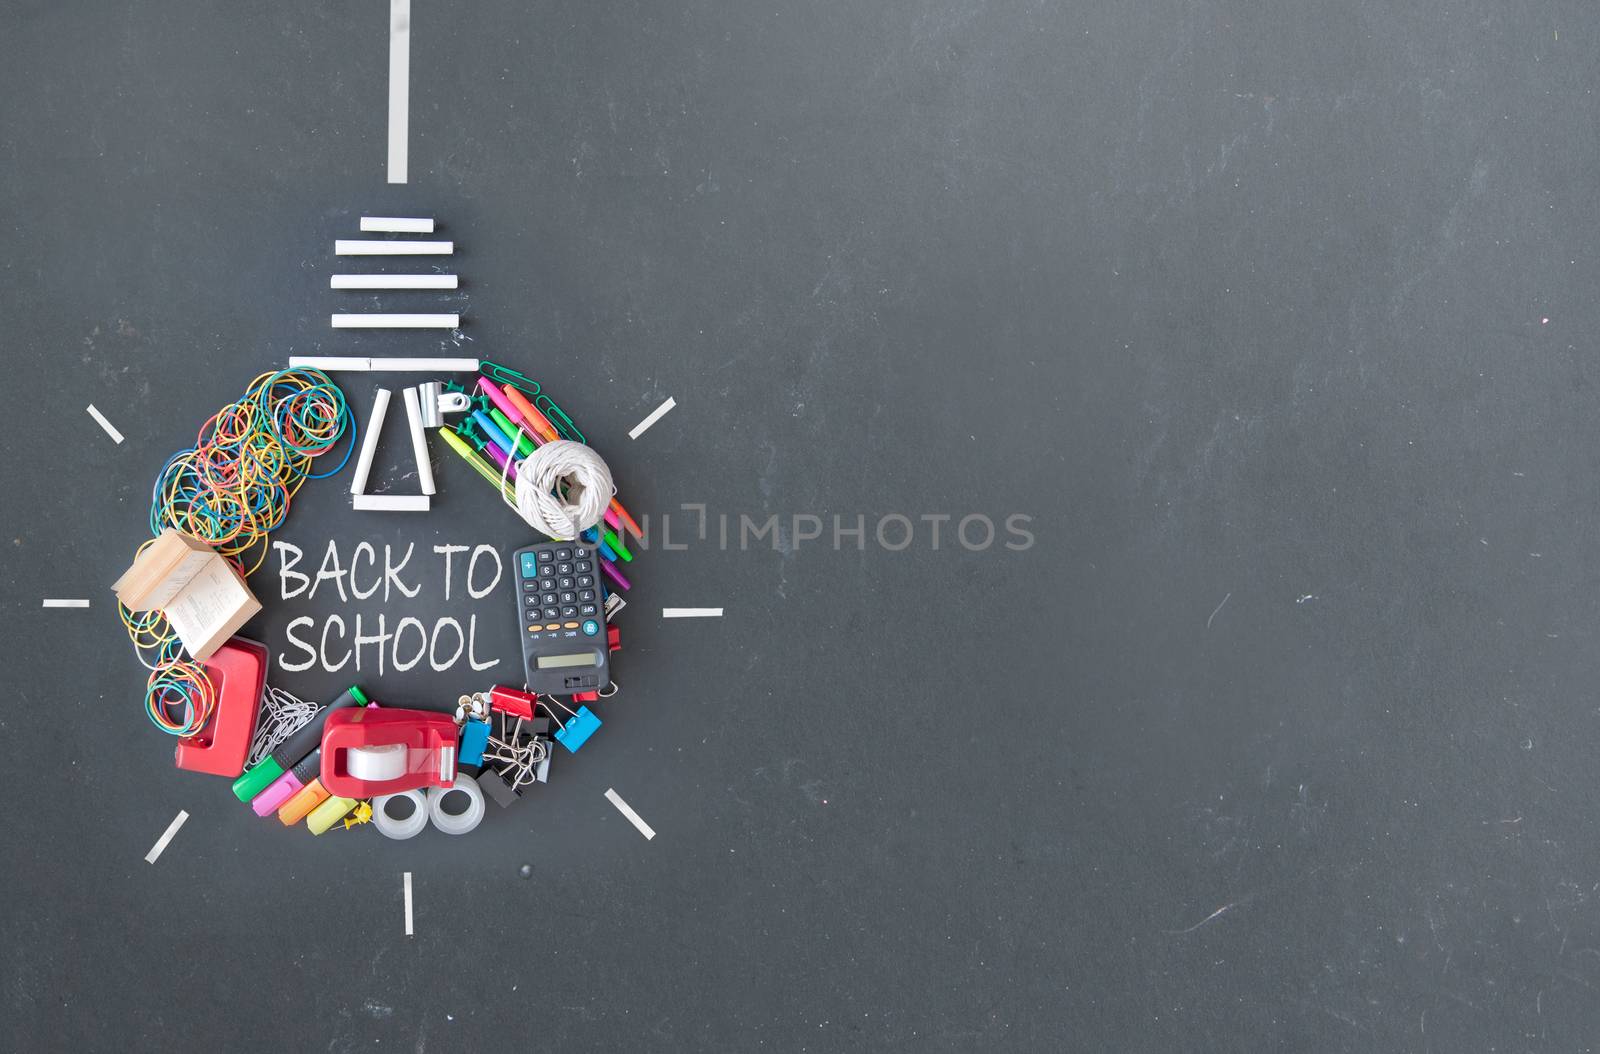 Light bulb icon 'hanging' made with many stationery accessories on a chalkboard